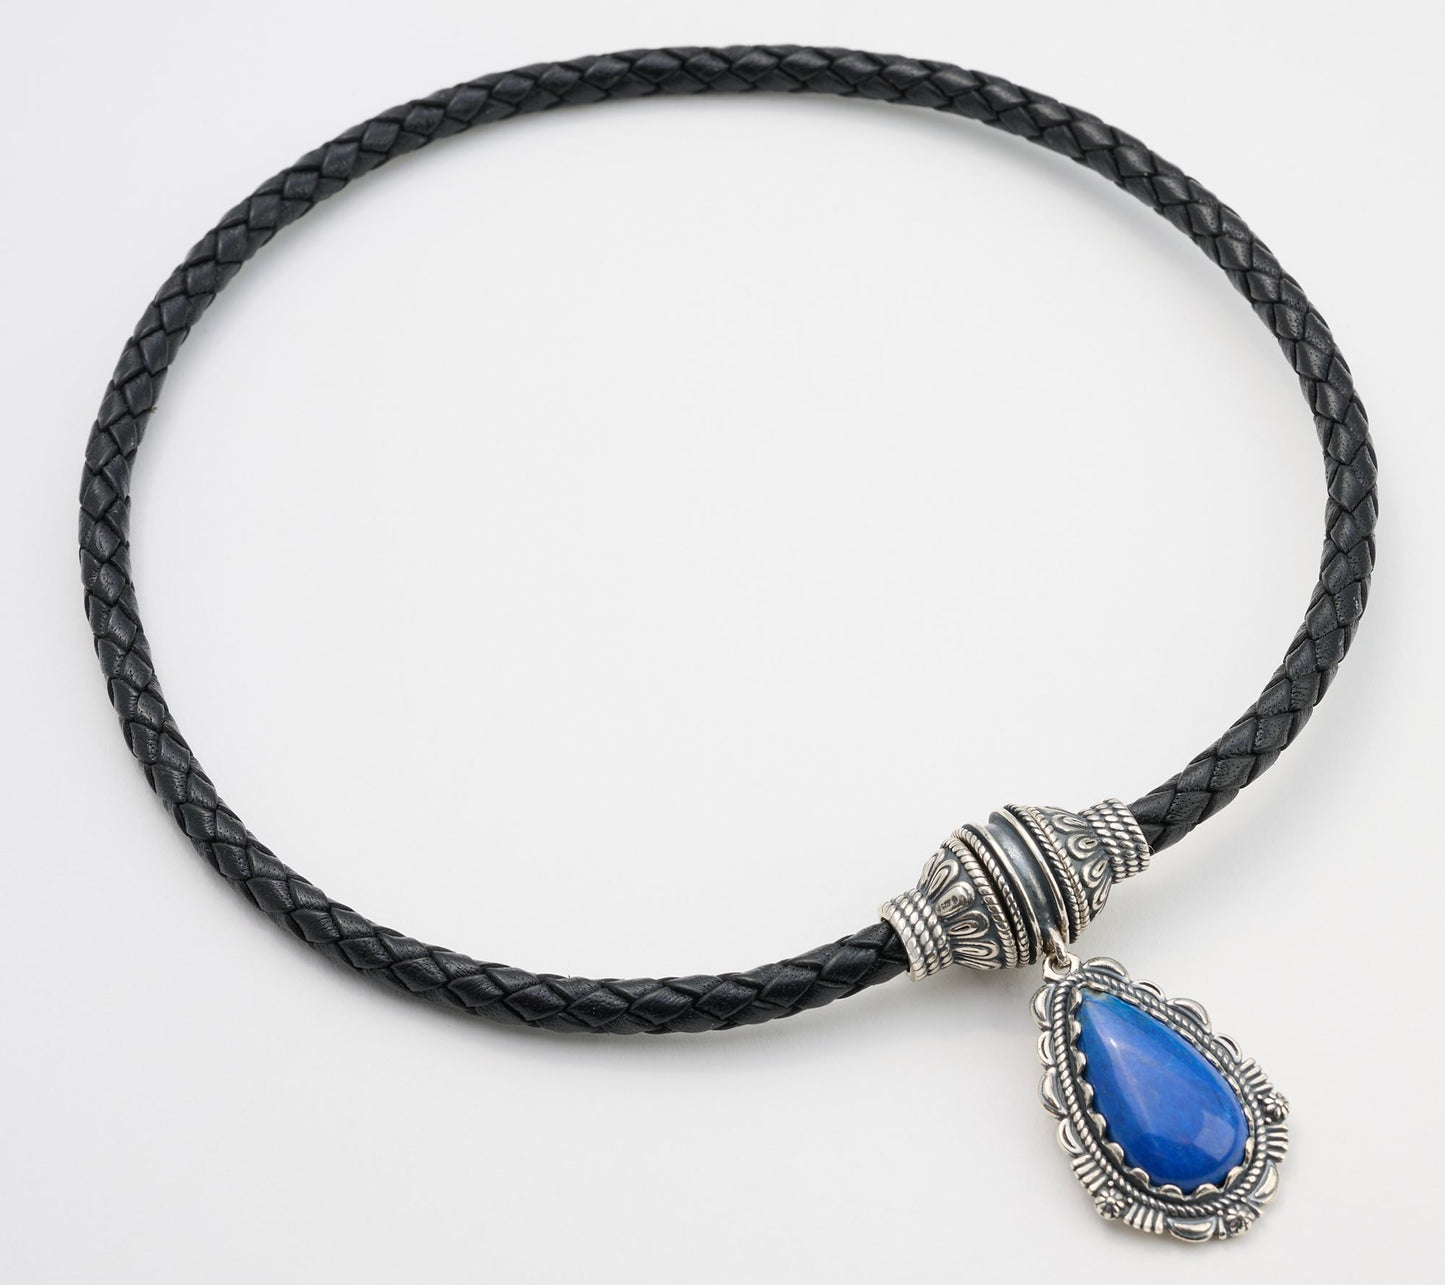 American West 20" Blue Lapis Braided Leather Necklace